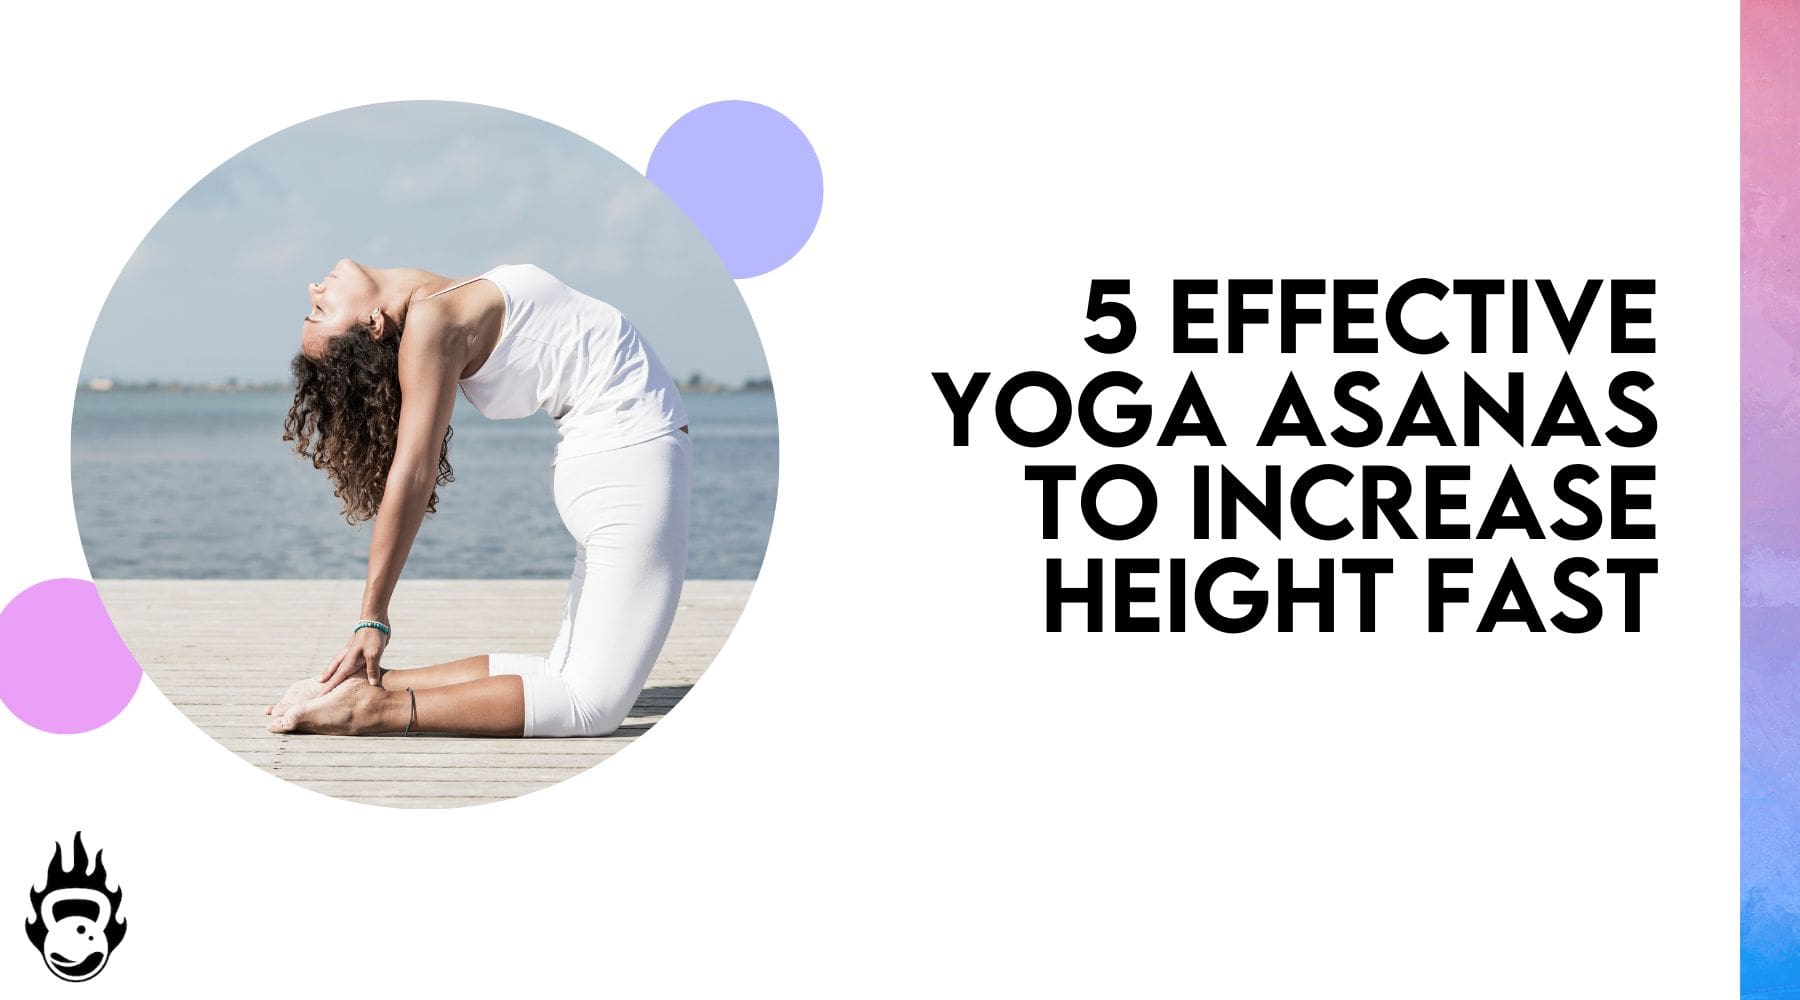 3 easy yoga poses to improve ankle strength you can do at home